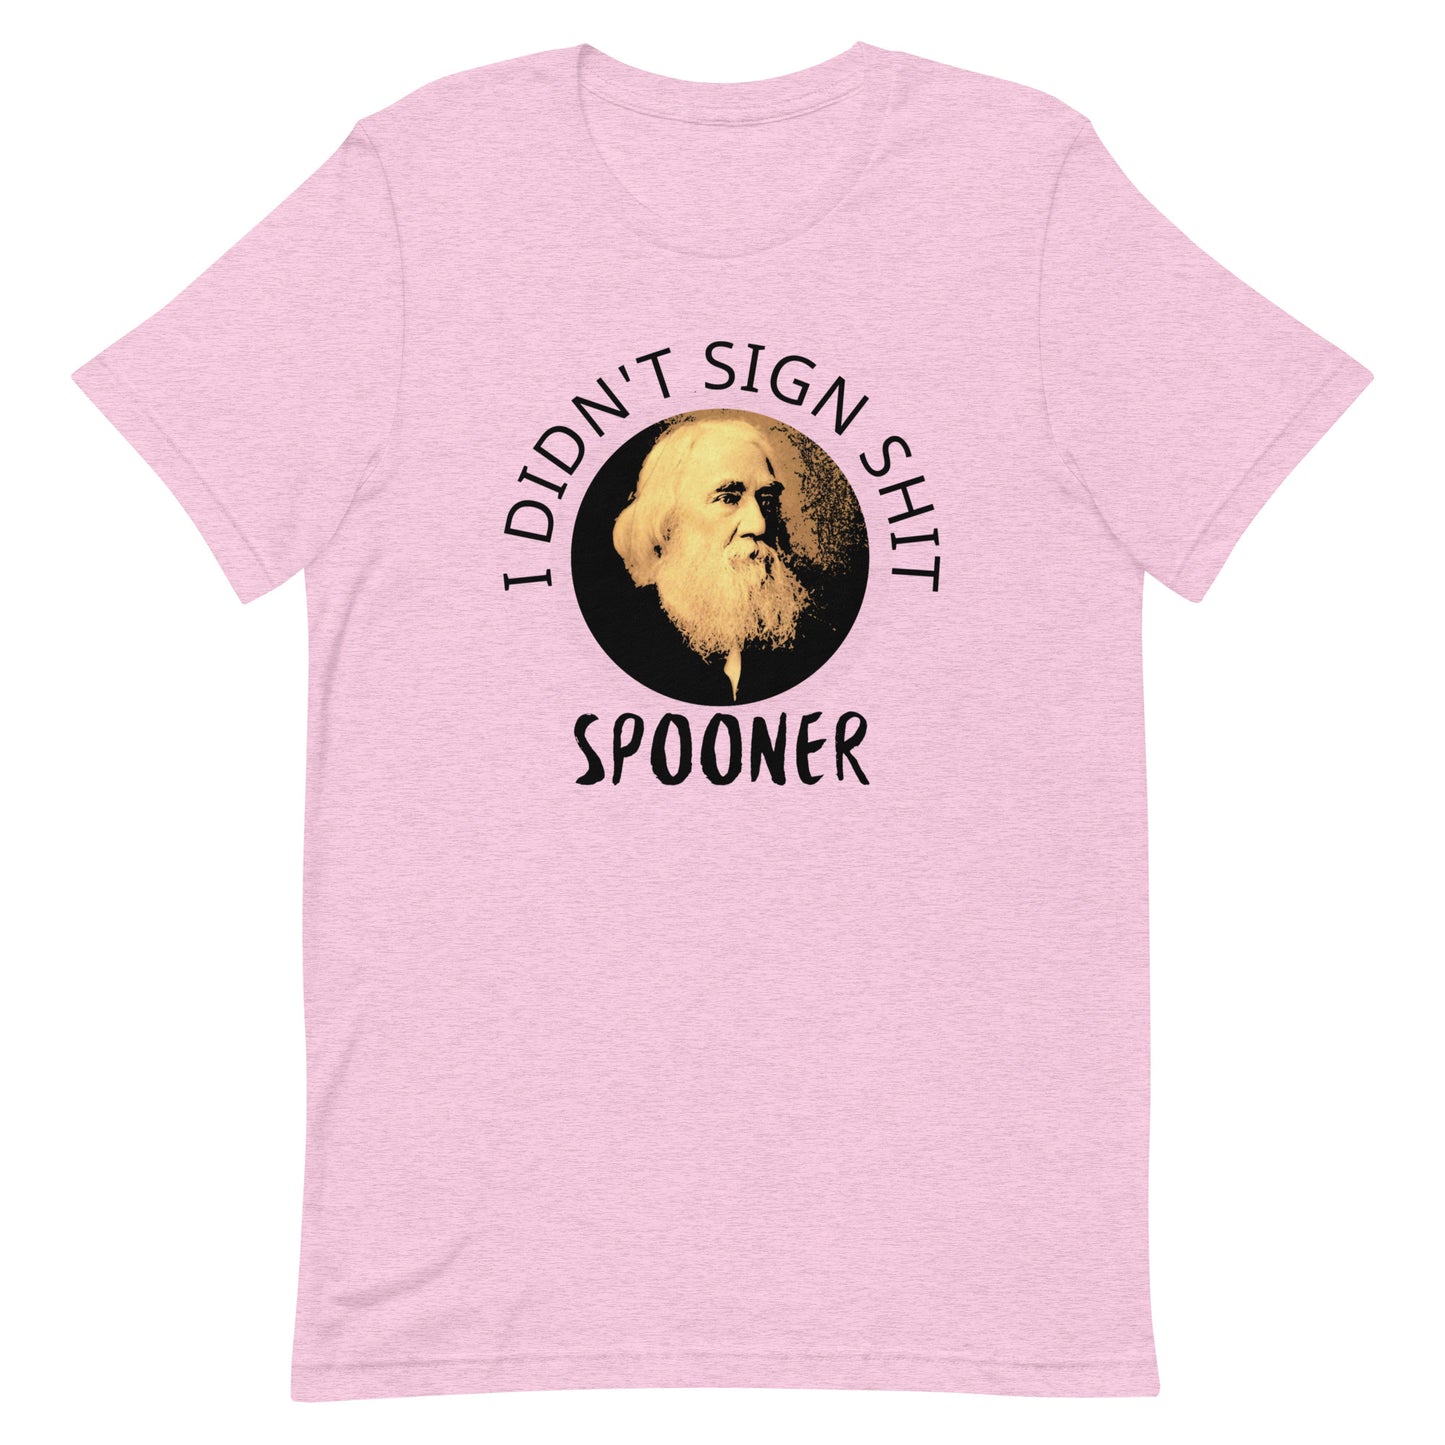 Anarchy Wear "I Didn't Sign Shit" Spooner Pastels Unisex t-shirt